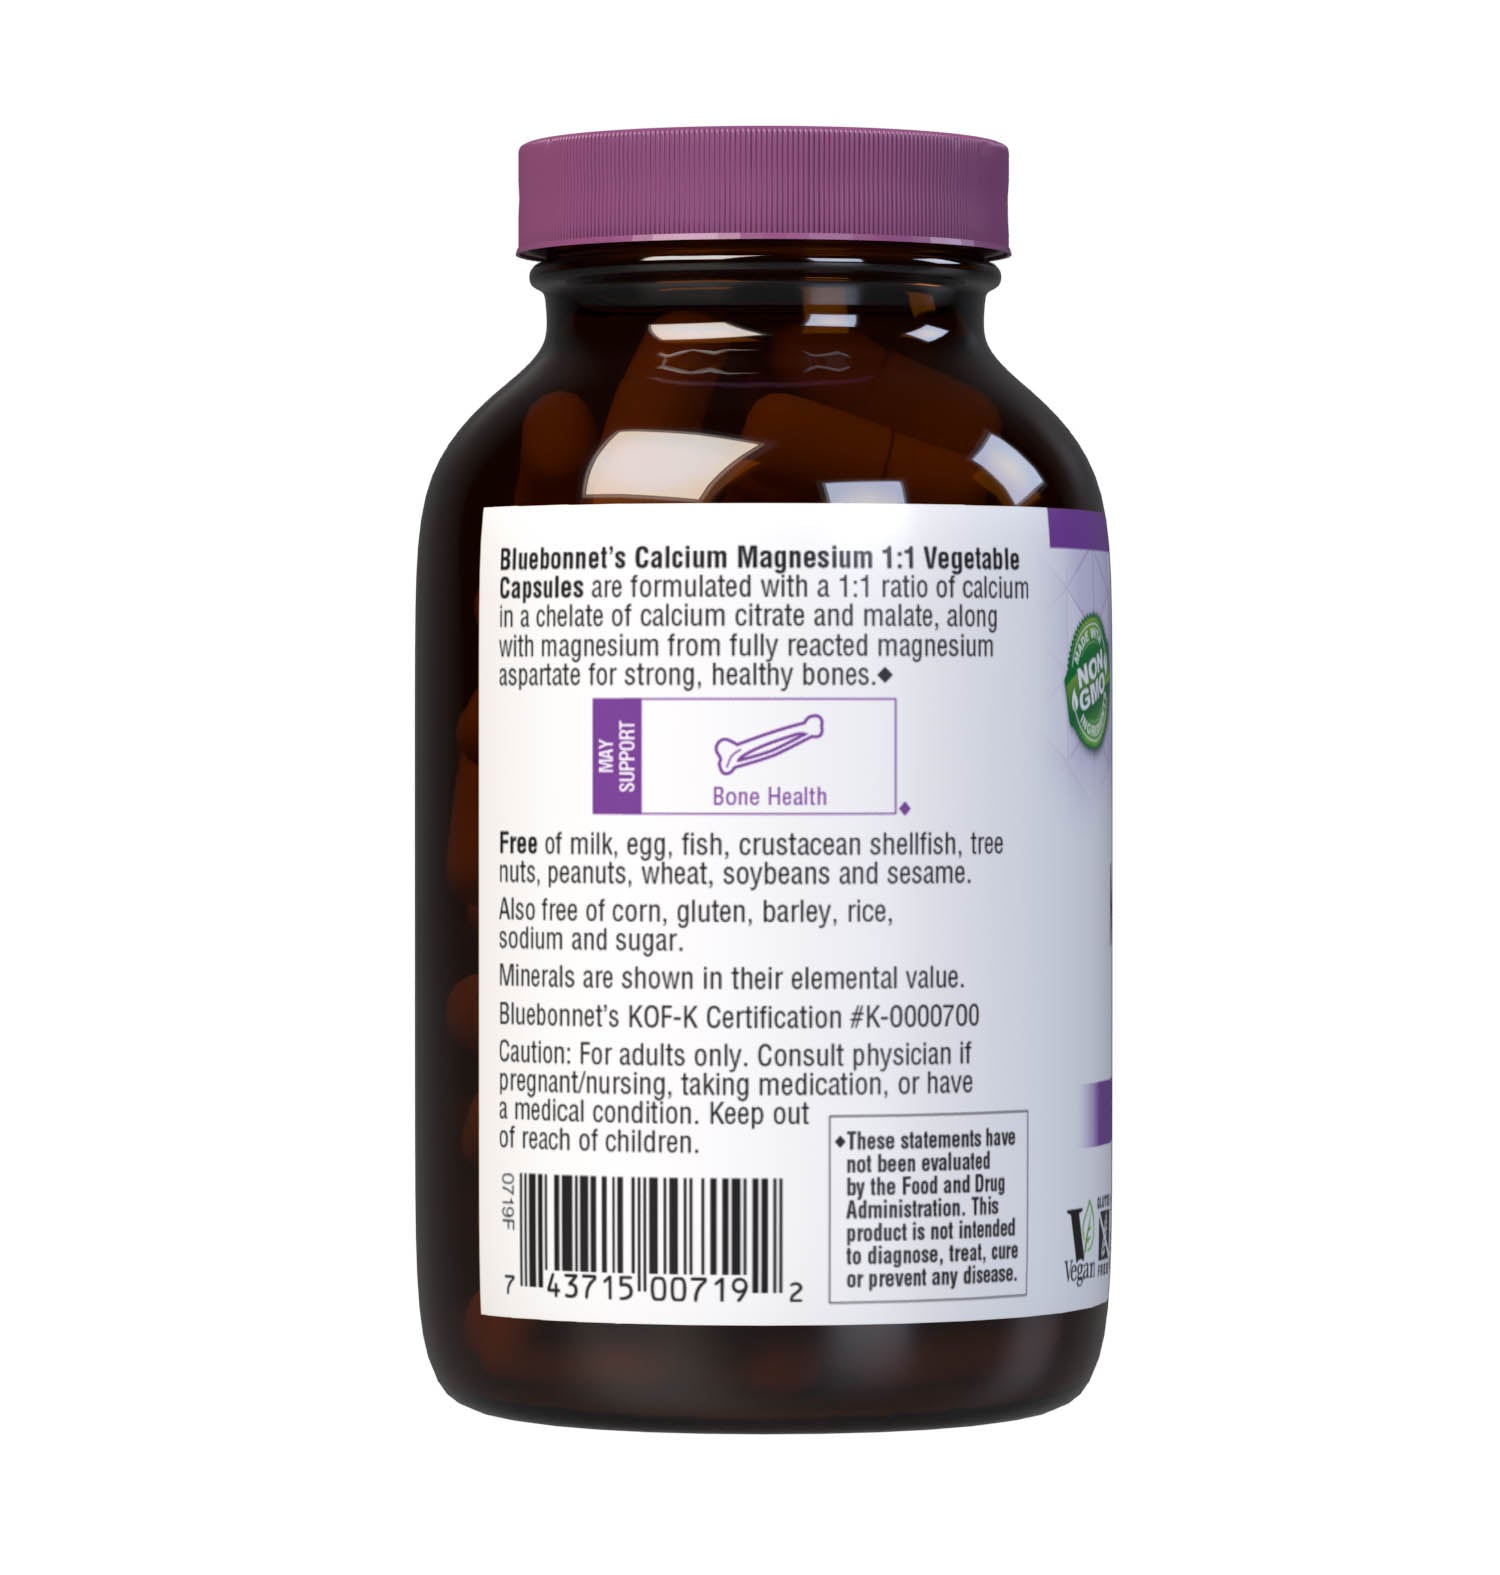 Bluebonnet's Calcium Magnesium 1:1 90 Vegetable Capsules are formulated with a 1:1 ratio of calcium in a chelate of calcium citrate and malate, along with magnesium from fully reacted magnesium aspartate for strong, healthy bones. Description panel. #size_90 count